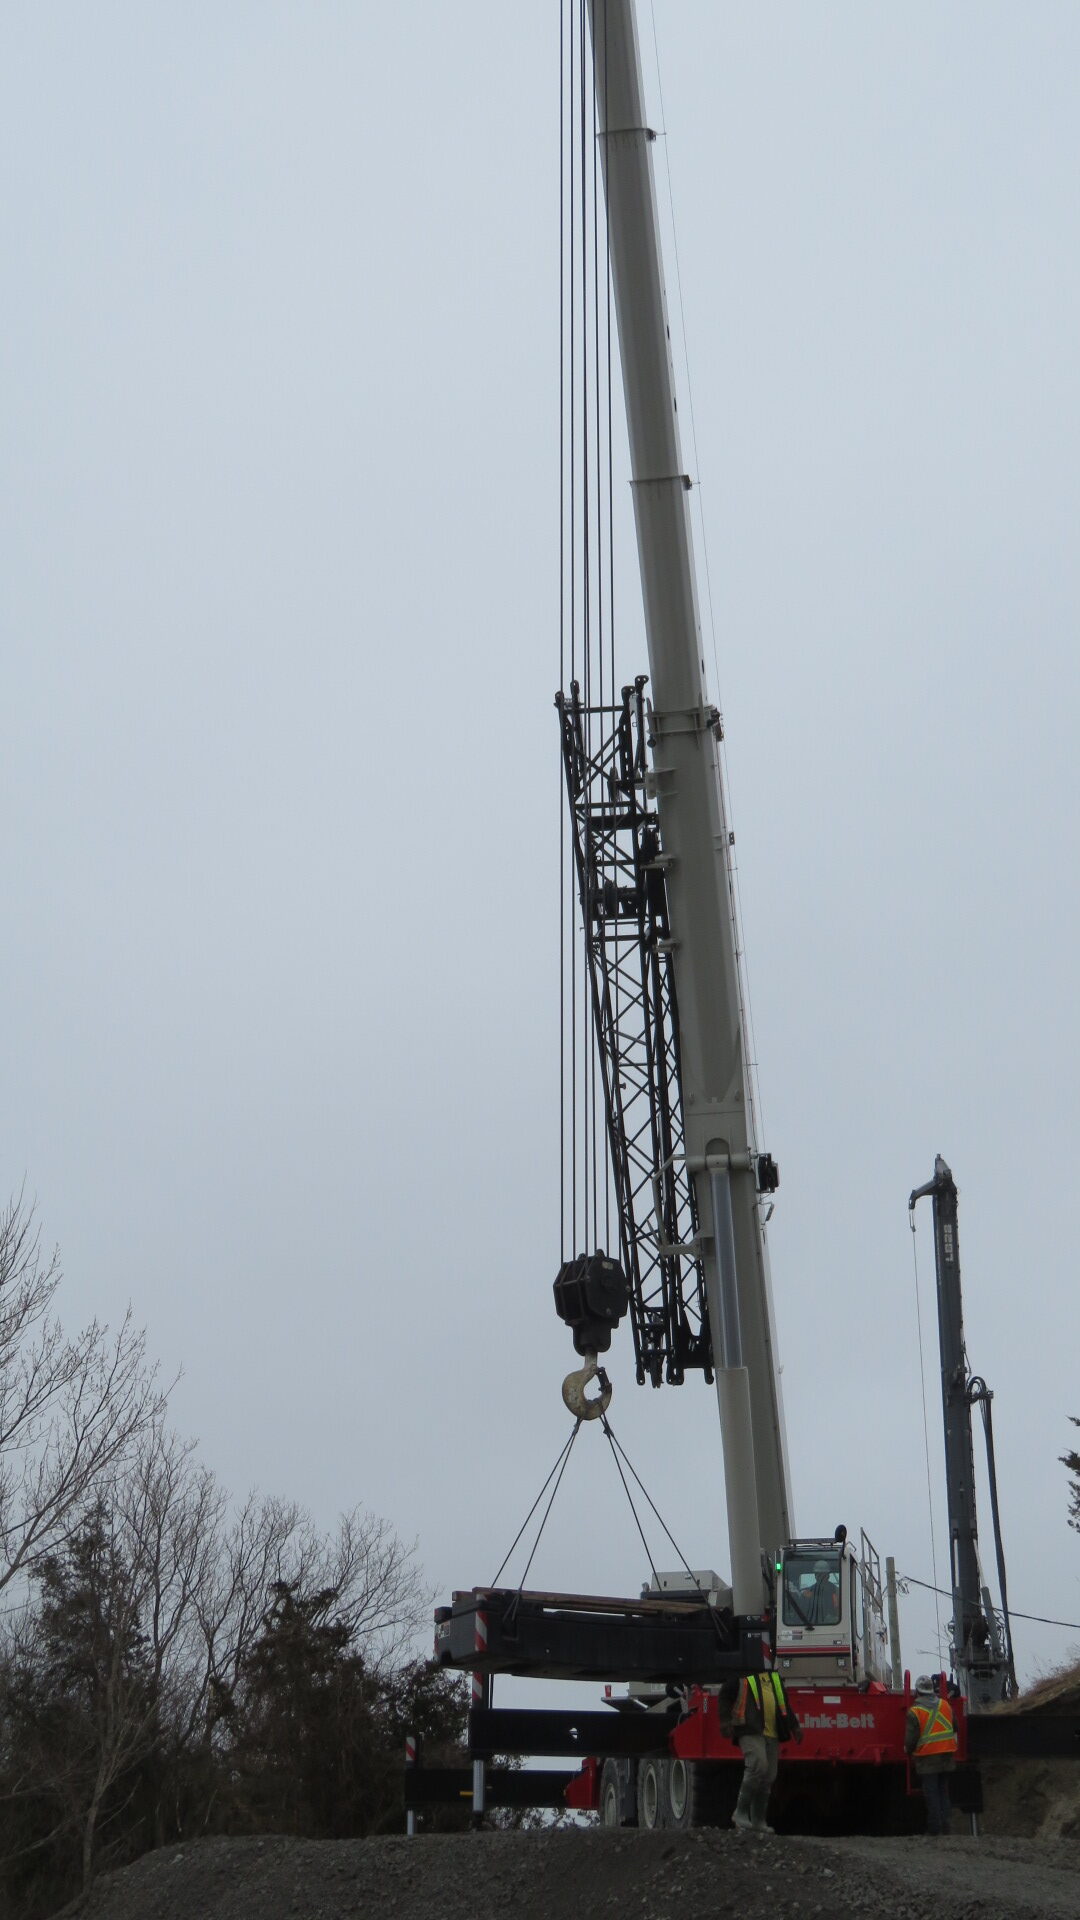 Installing the counter weights on the crane